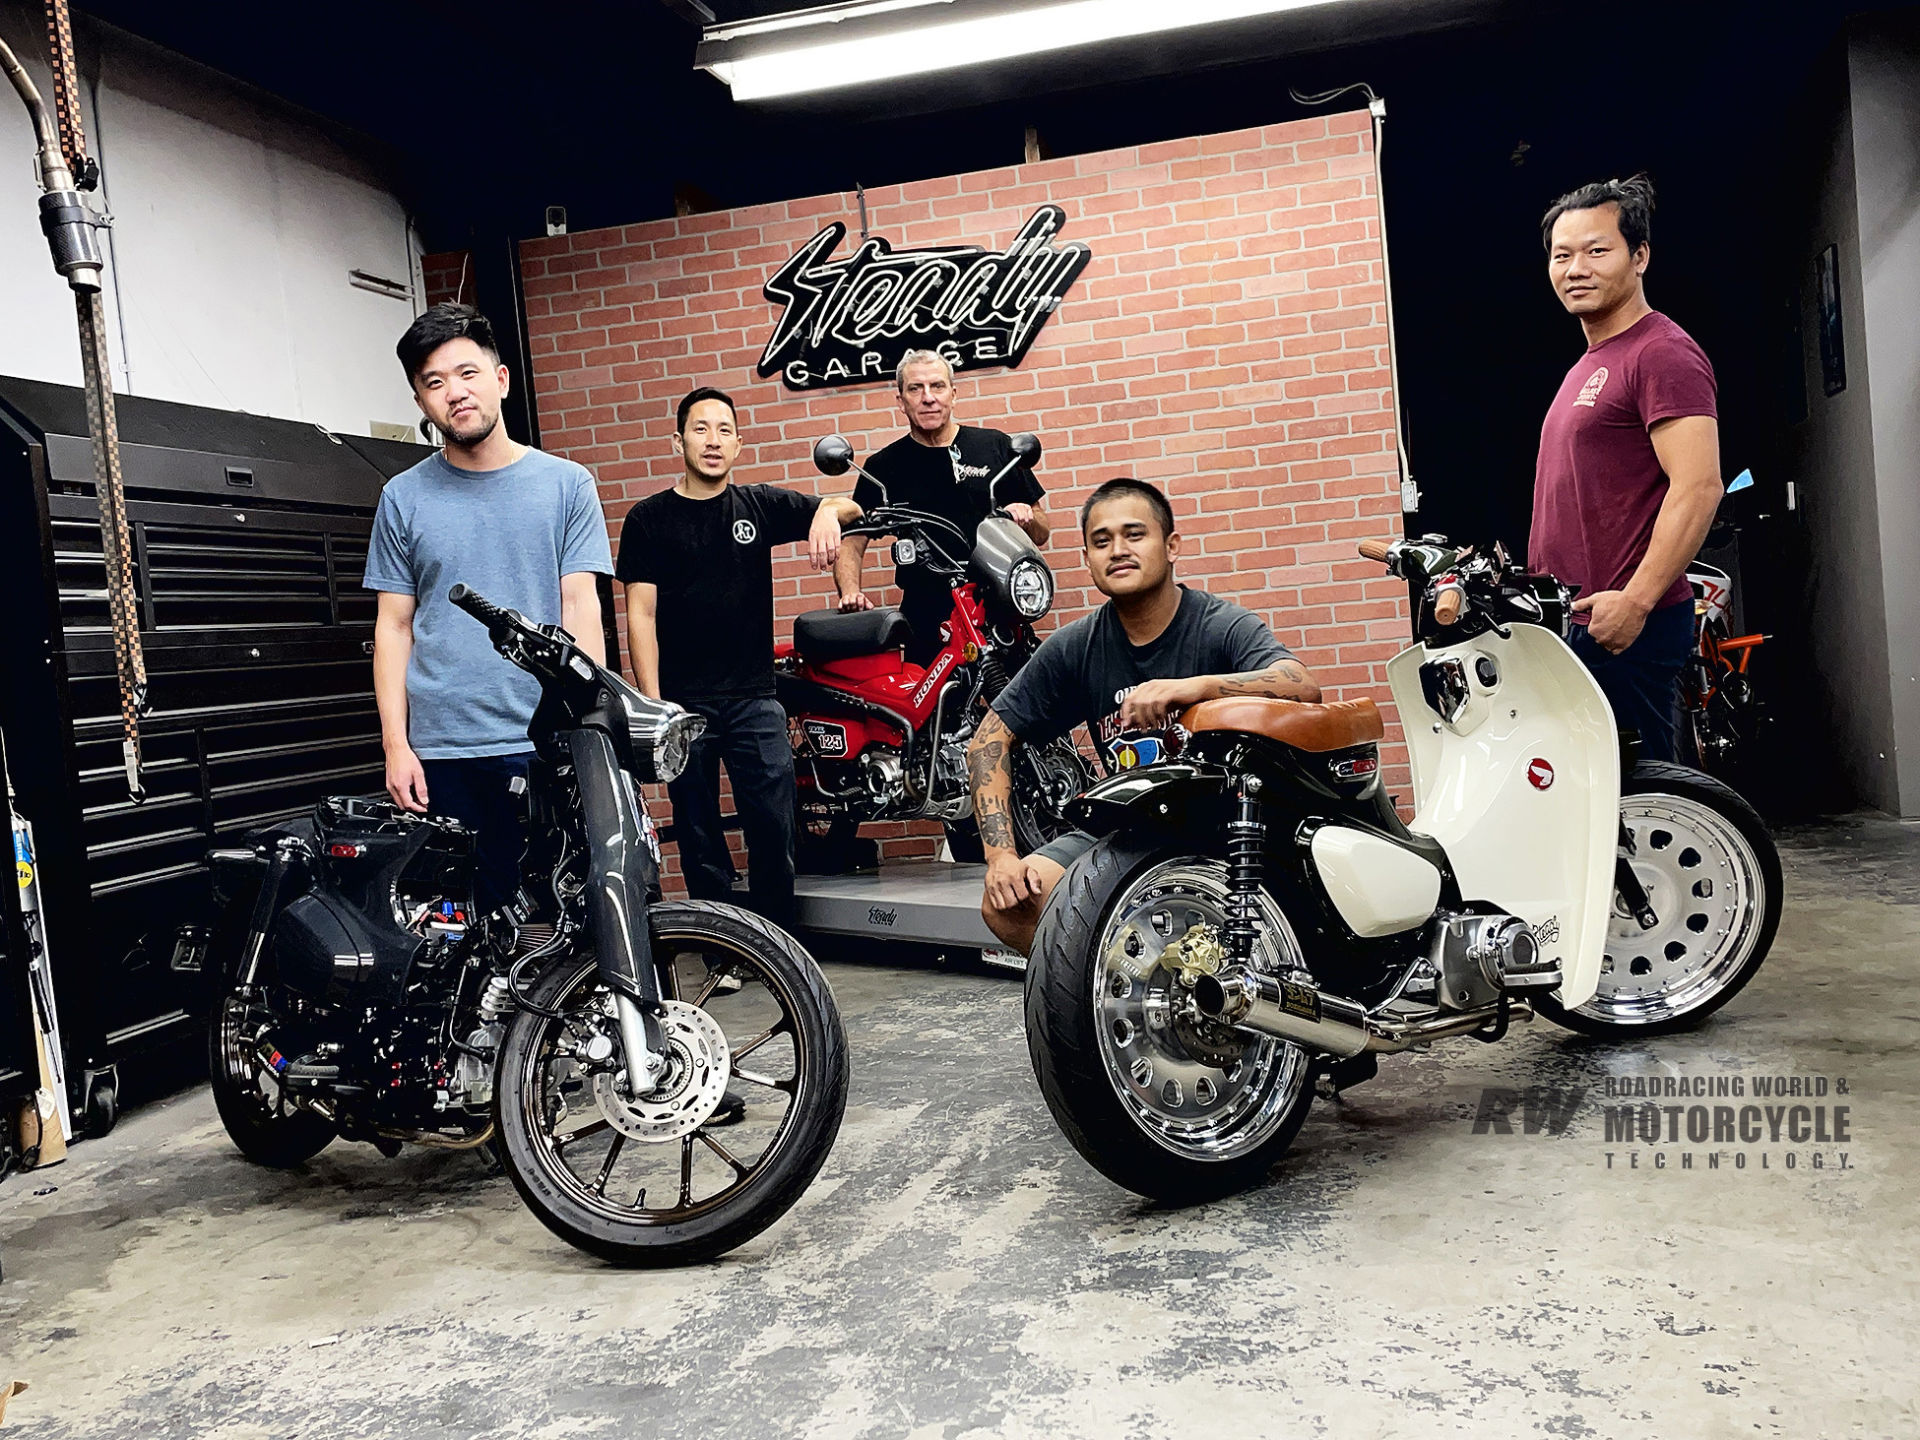 The Steady Garage crew includes (from left) Web/Media Director Duy Nguyen, Technical Director Kevin Dunn, CNC Engineer Brude McKee, Art/Creative Director Francis Clemente, and Mechanical Engineer Jimmy Chen, posing here with some of their project bikes. Photo courtesy Steady Garage.